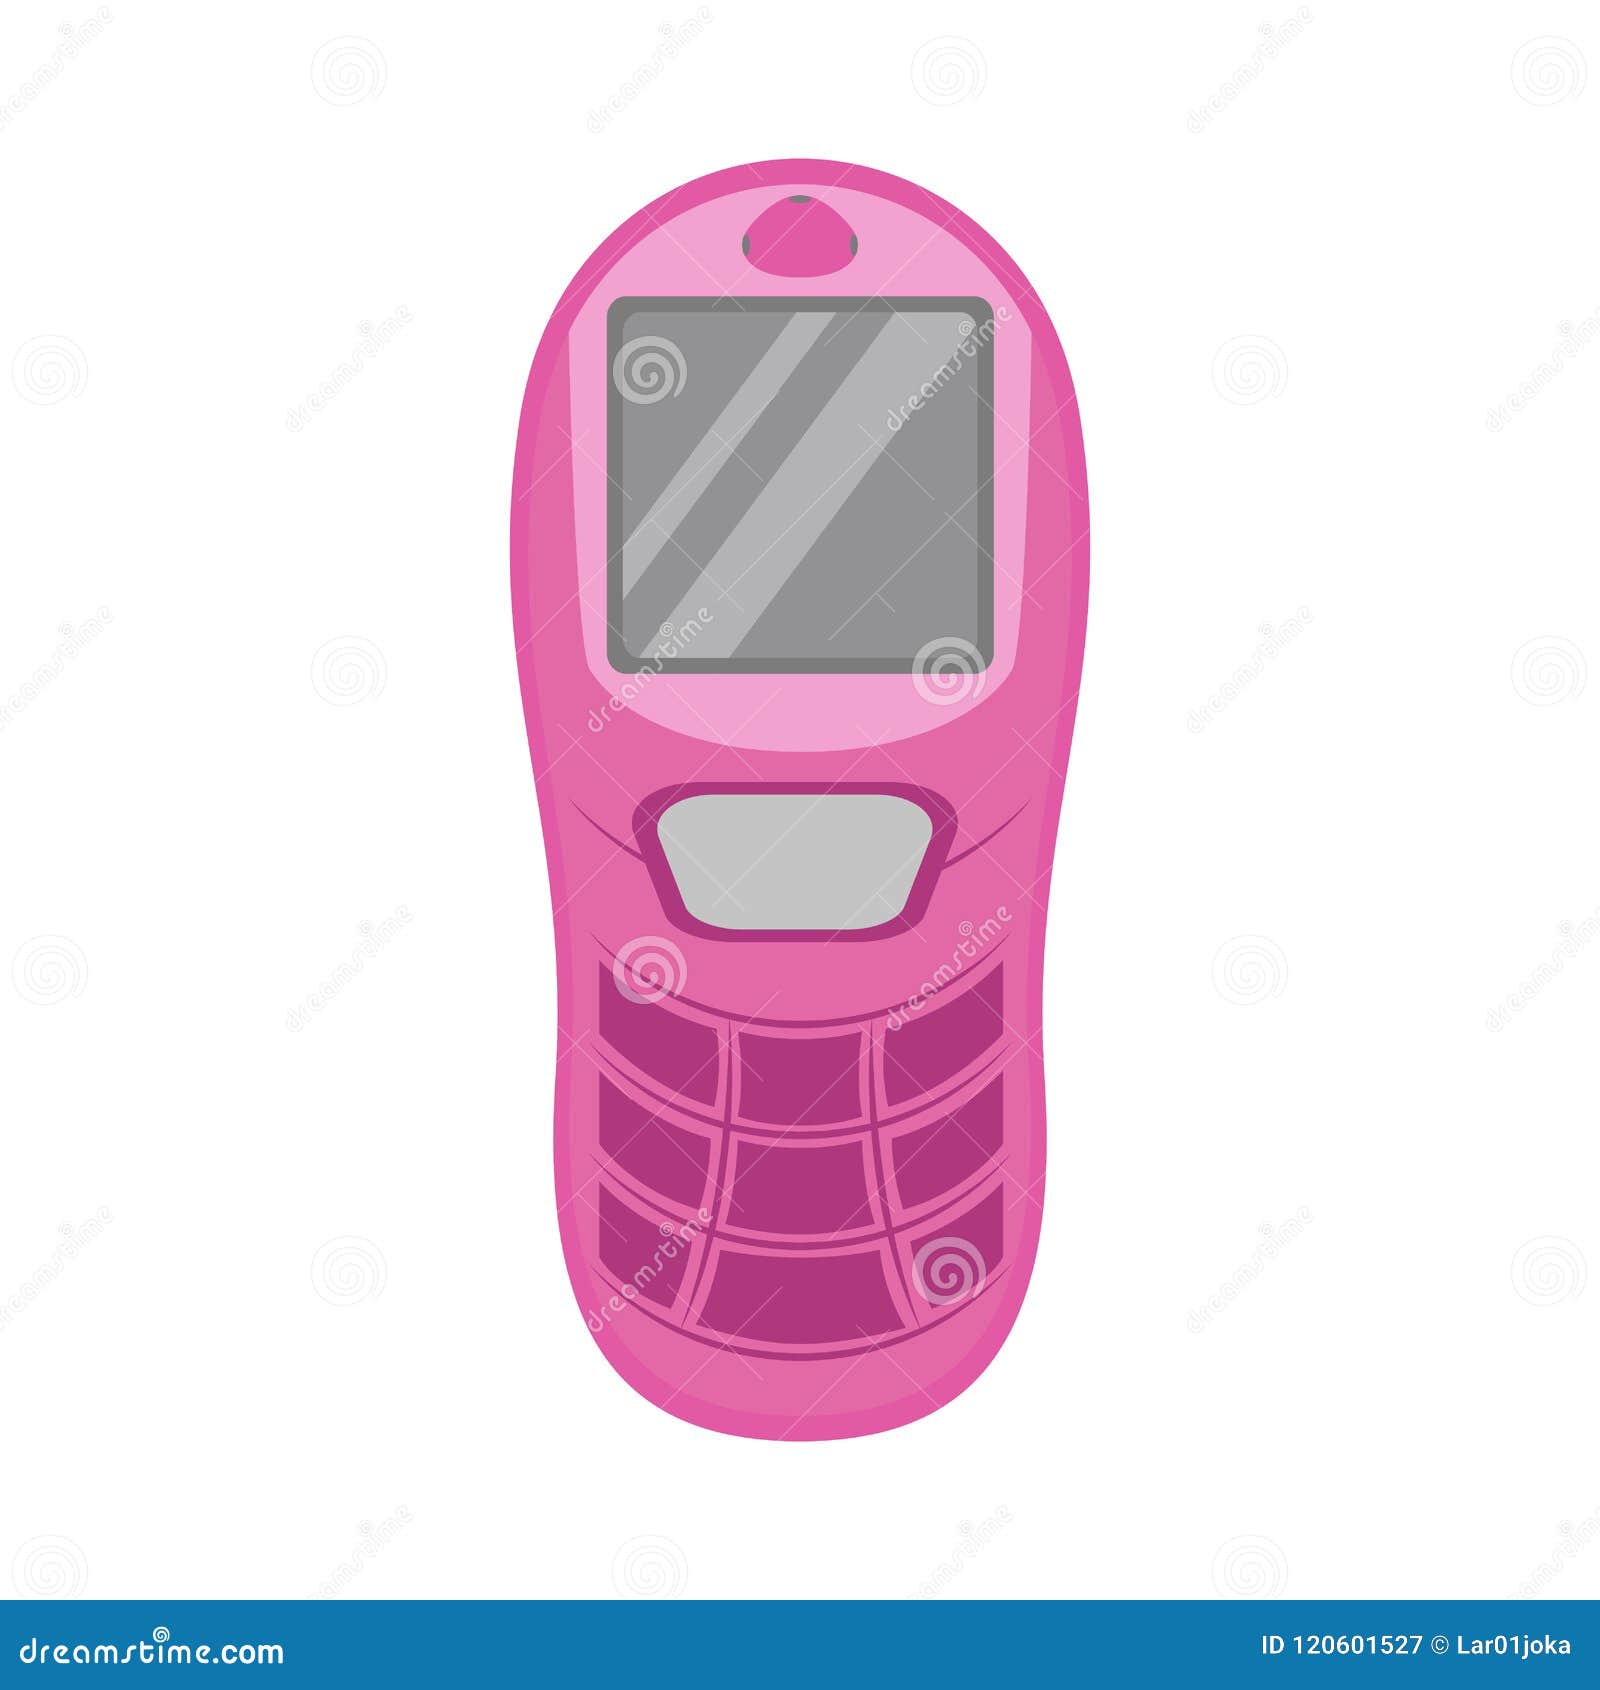 Isolated Old Cellphone Icon Stock Vector - Illustration of icon ...